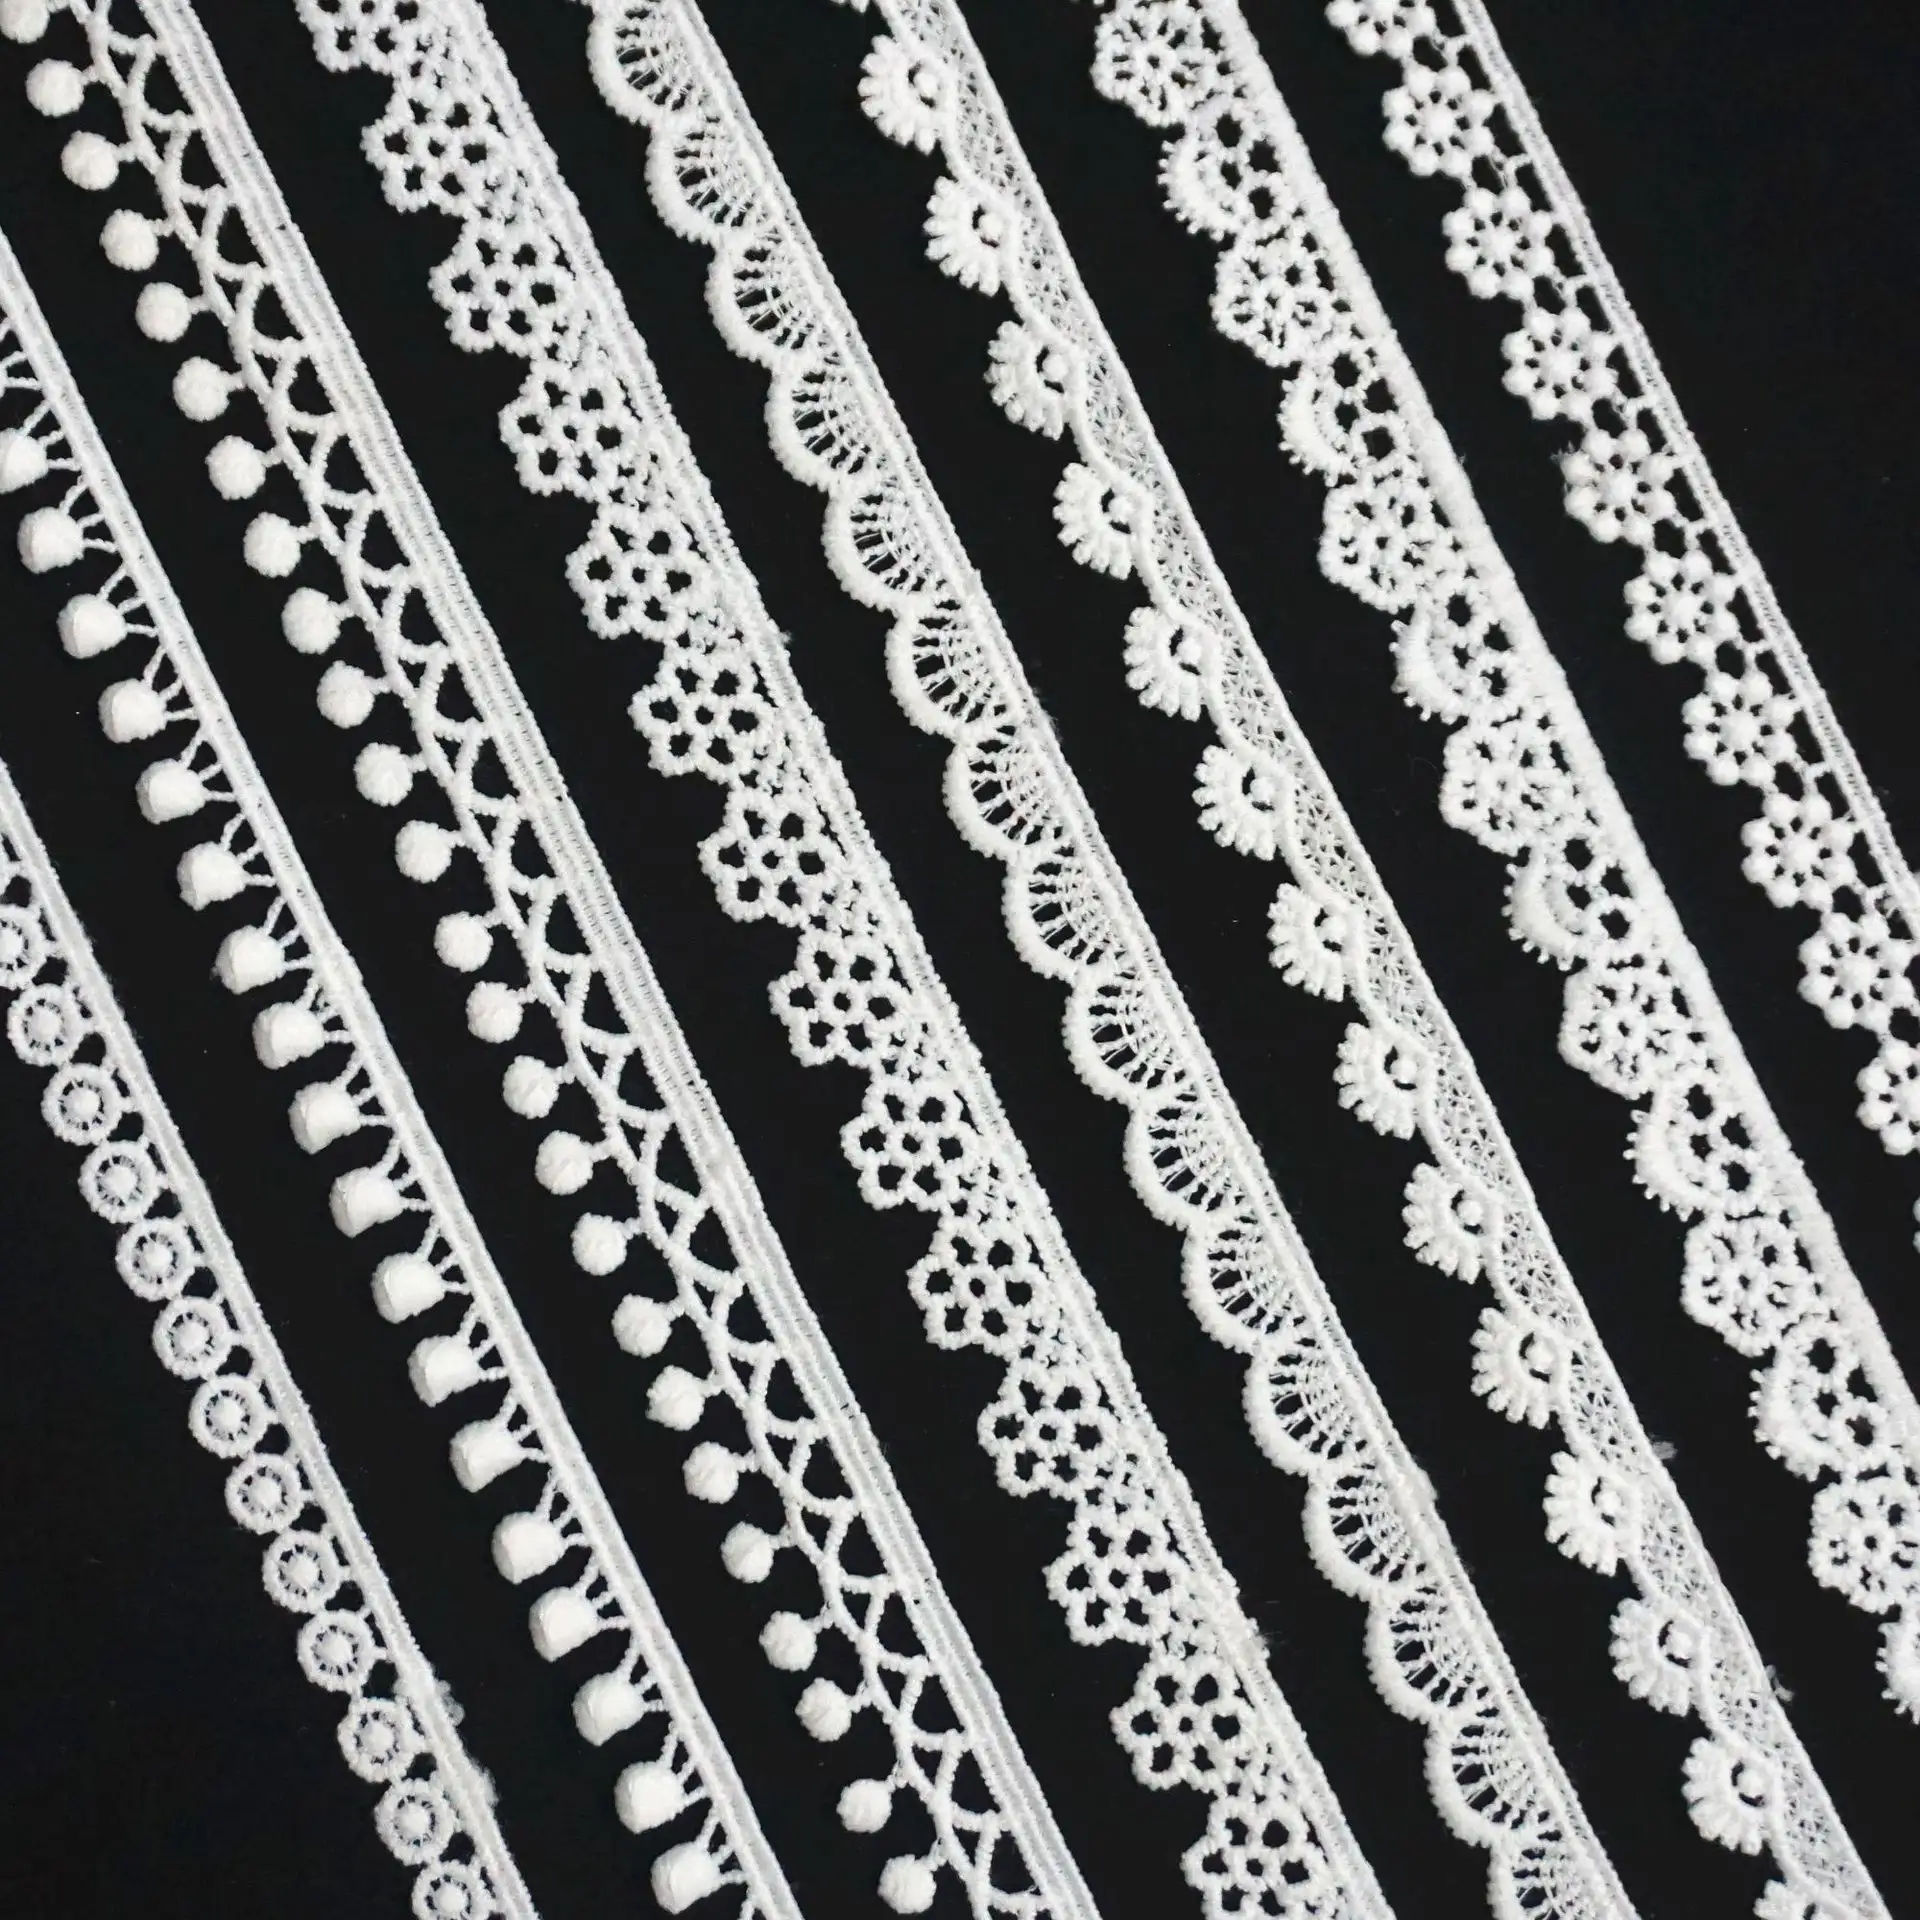 High Quality Embroidery Lace Polyester Lace Trim For Garment Accessories Decoration guipure lace 1cm